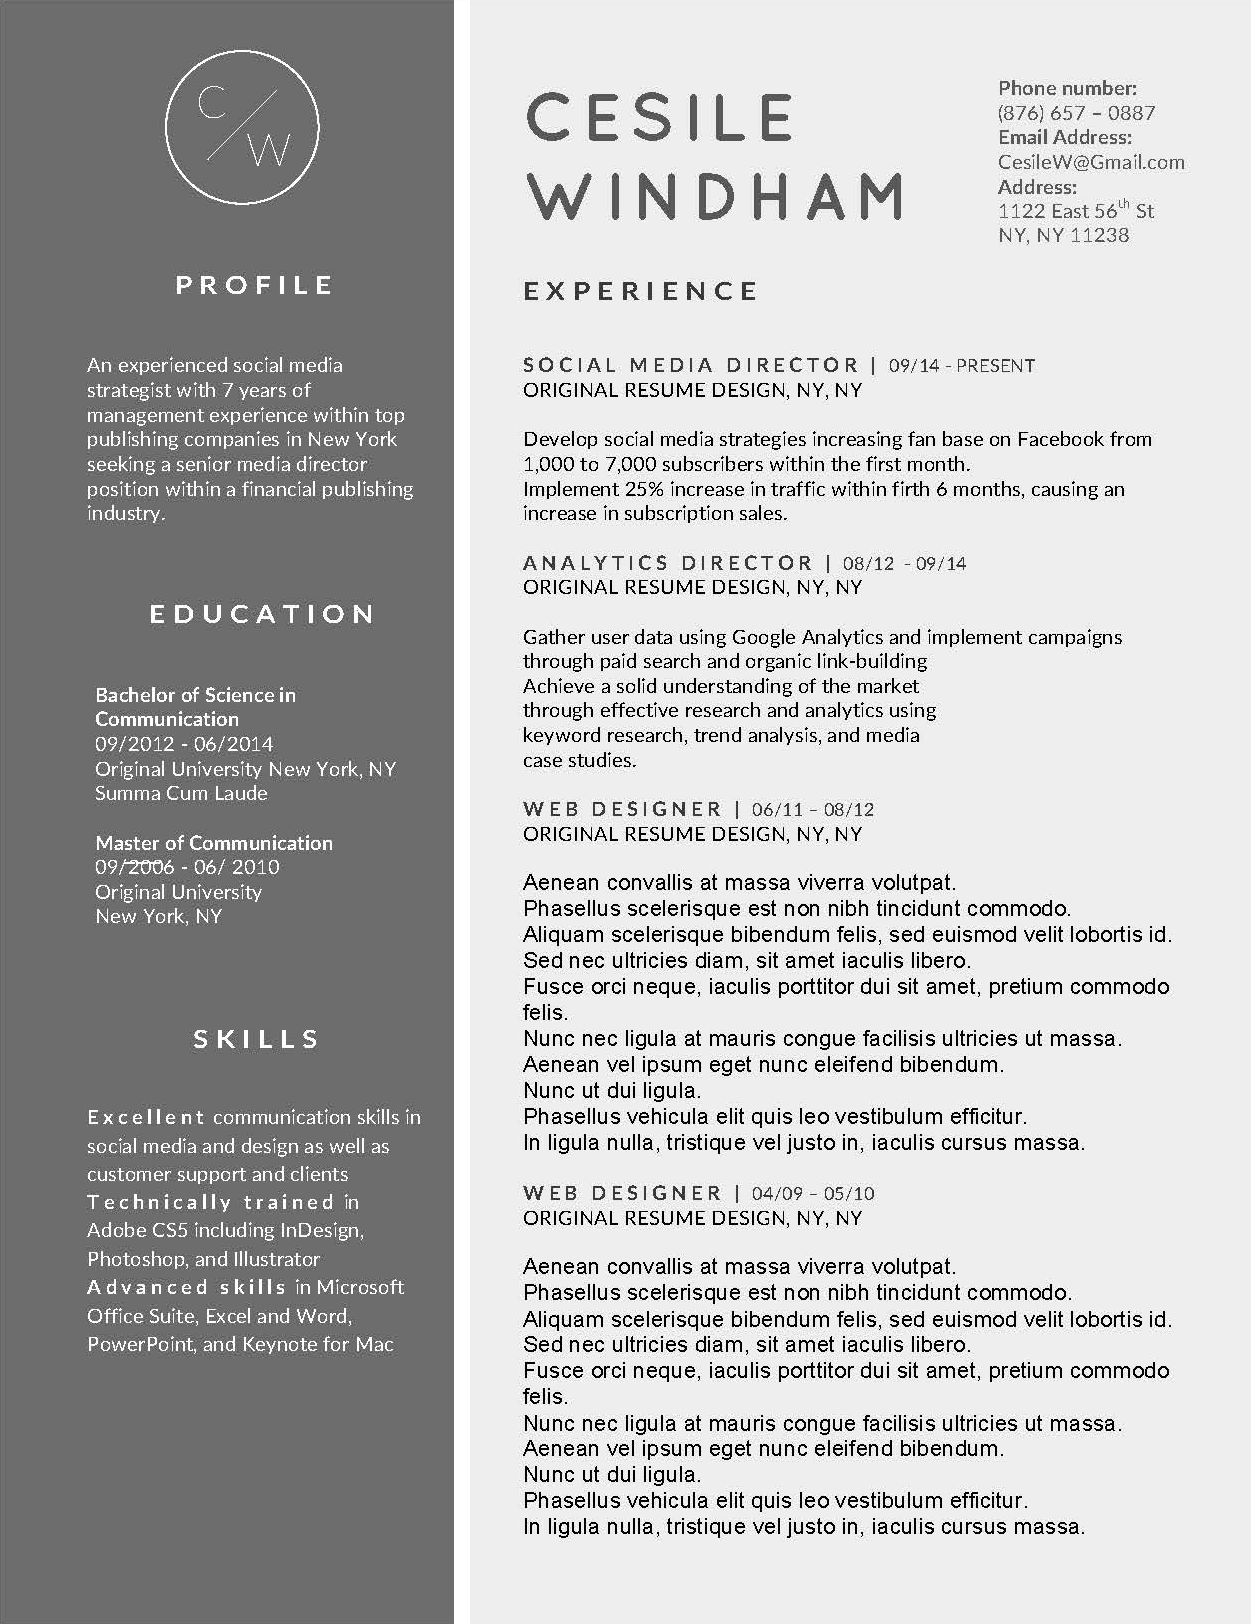 Cesile Windham - Downloadable Resume Template for Microsoft Word and Apple Pages